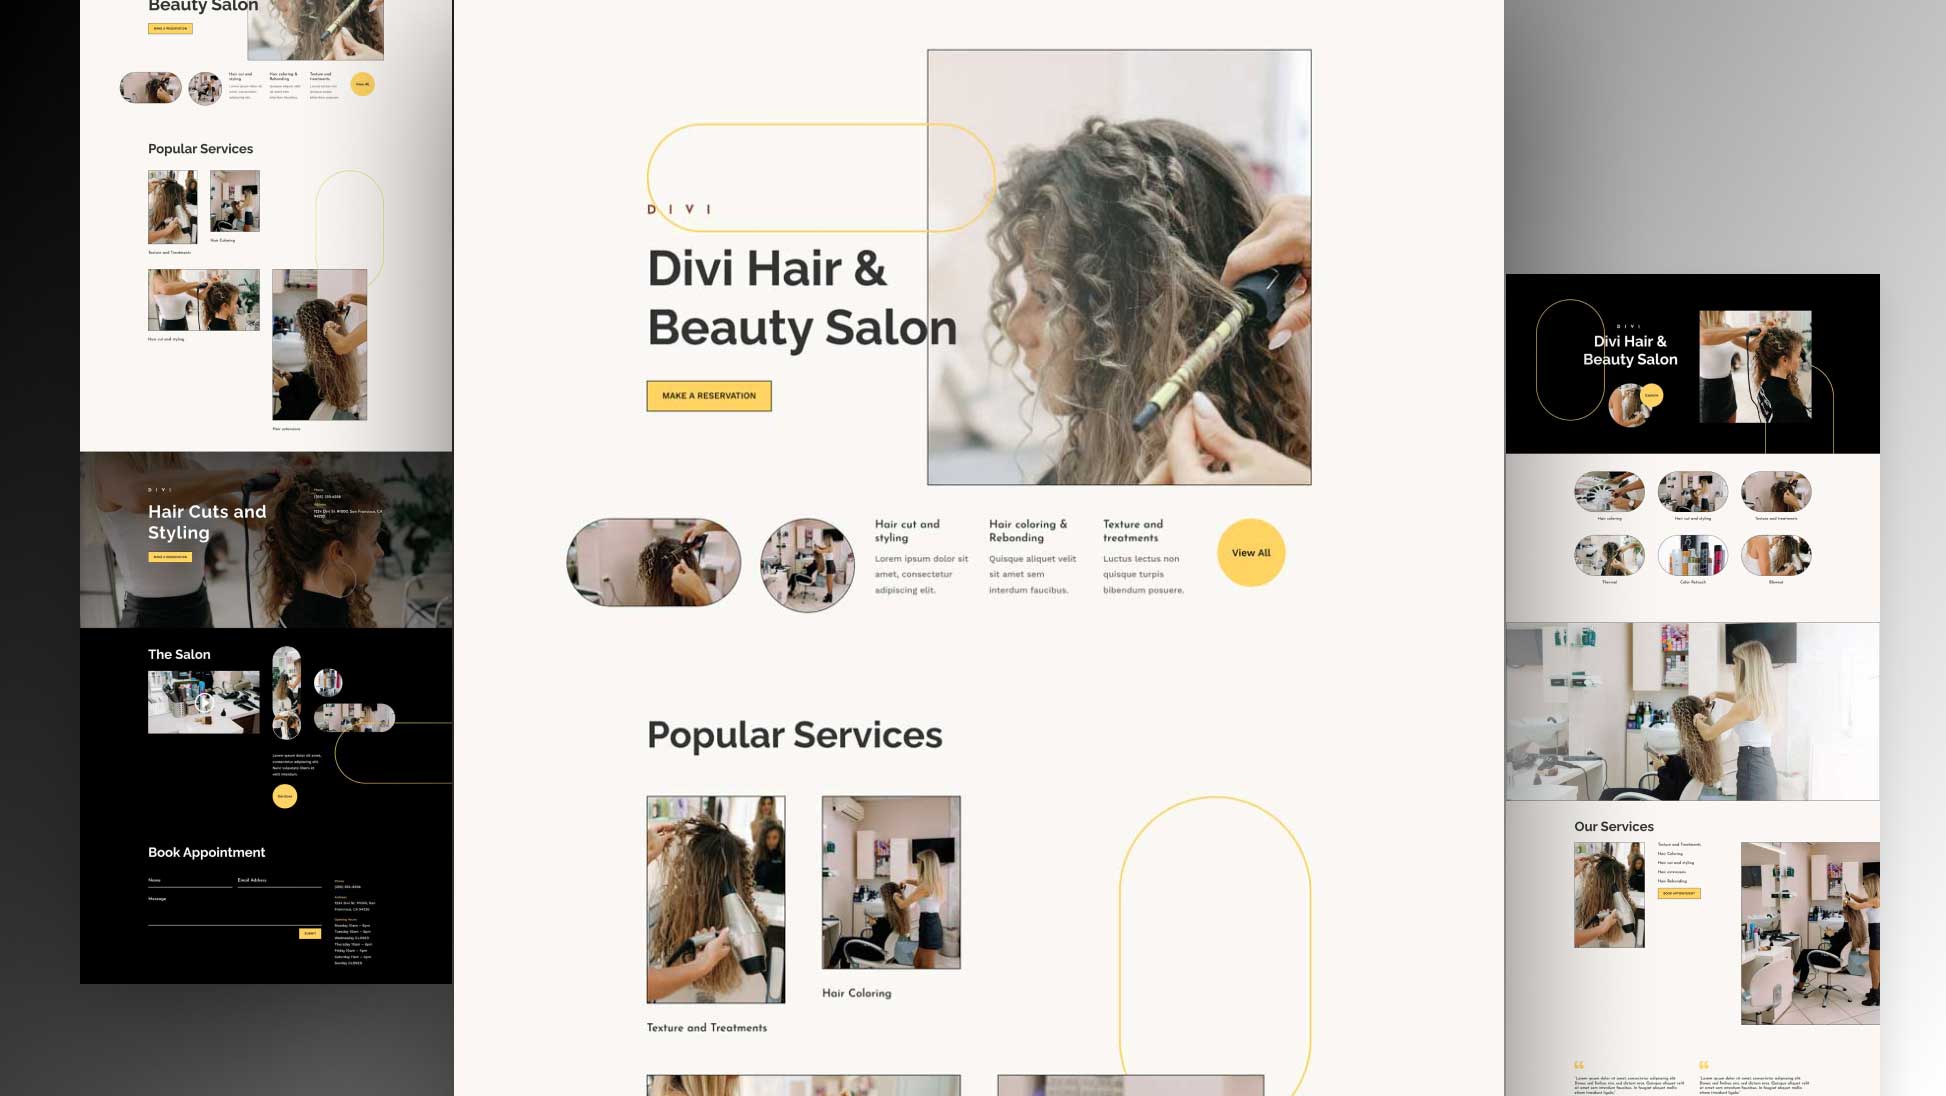 Get a FREE Hair Salon Layout Pack for Divi